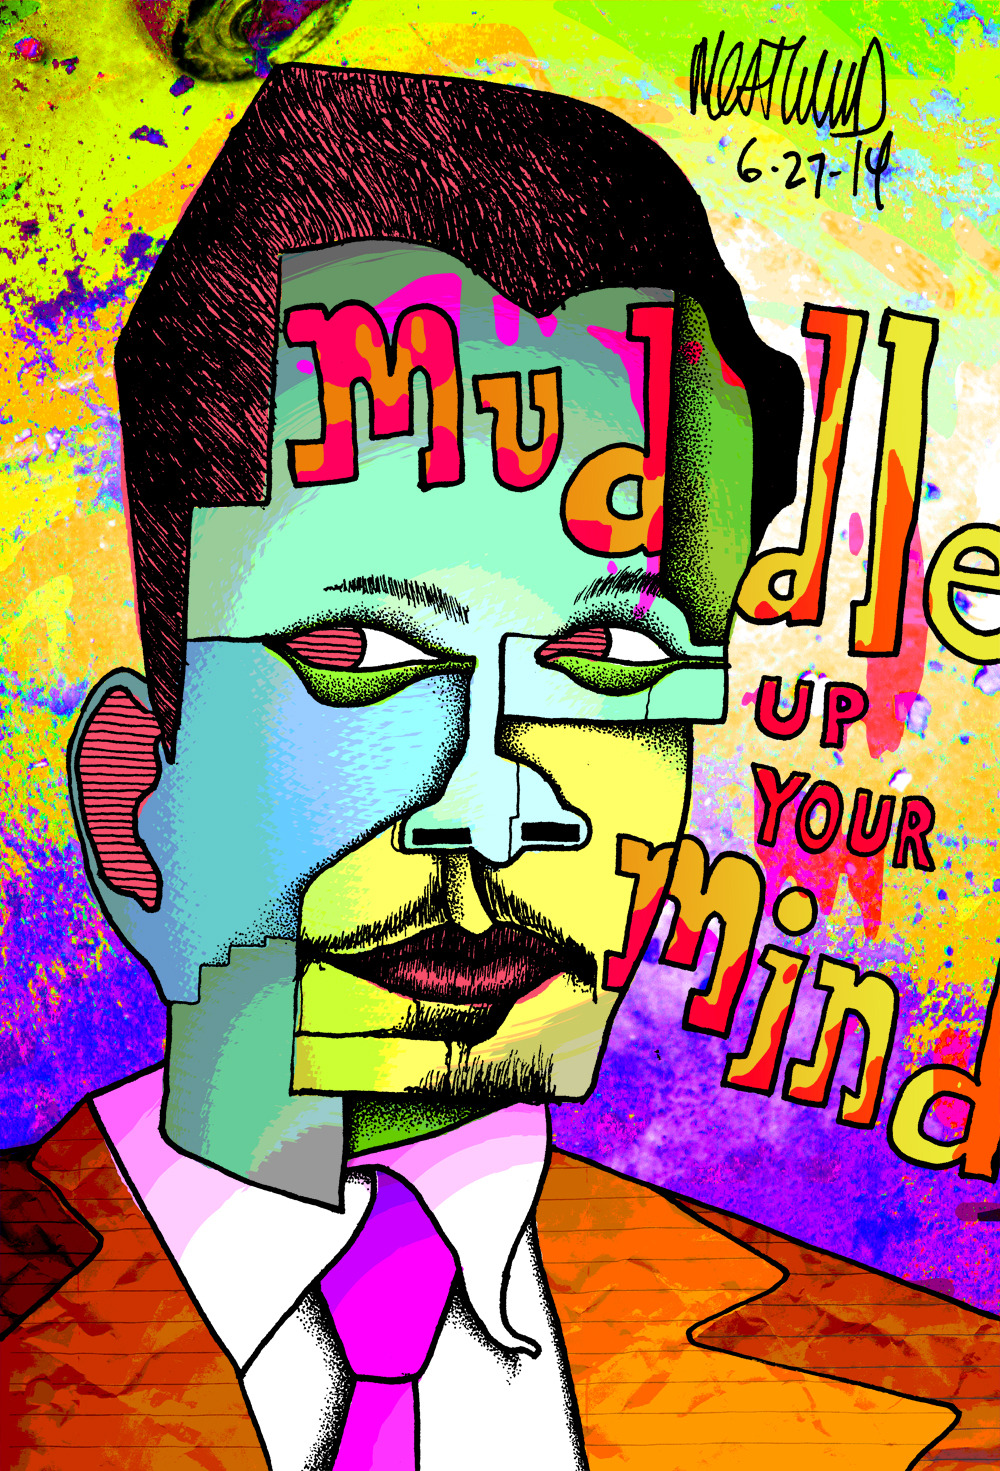 Artist Name: Meathead
Tumblr: http://meatheadsux.tumblr.com
Portrait of Terrence Howard, by Meathead
New art every day at http://meatheadsux.tumblr.com